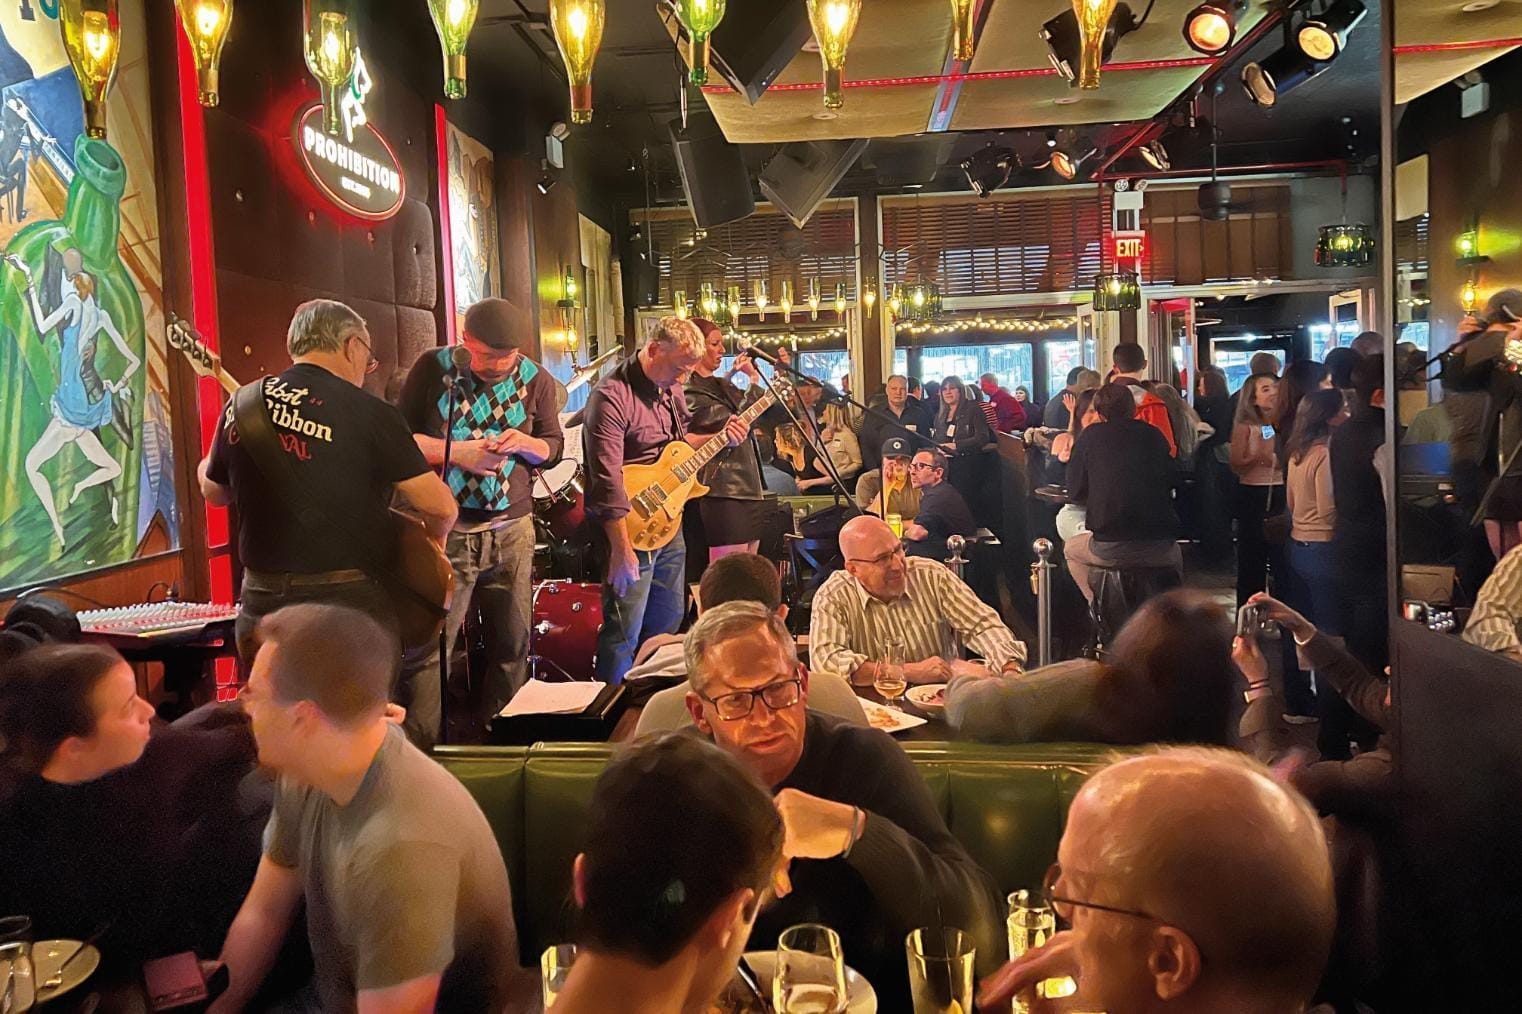 Two guitarists and other band members get ready on stage in a bar as people eat and drink around them.